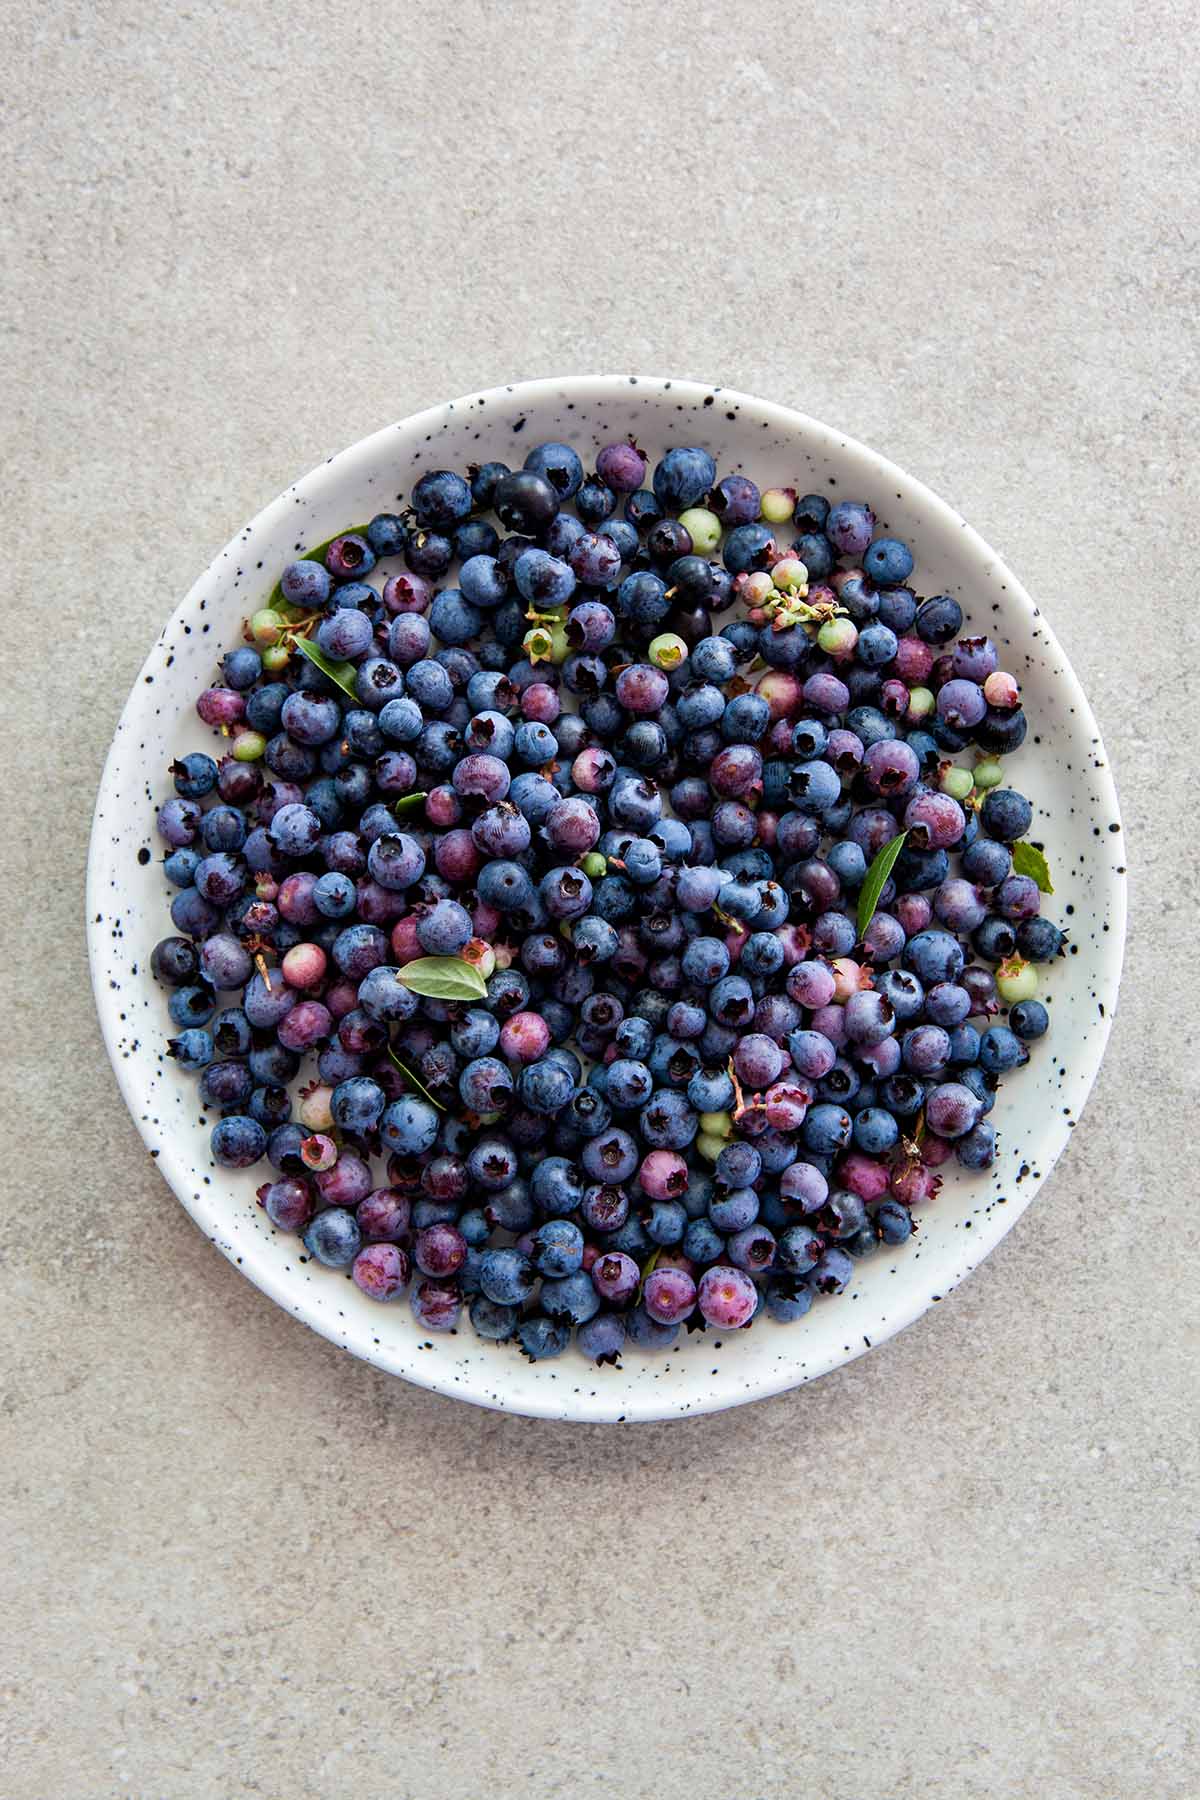 A small white speckled plate filled with wild blueberries on a stone surface.